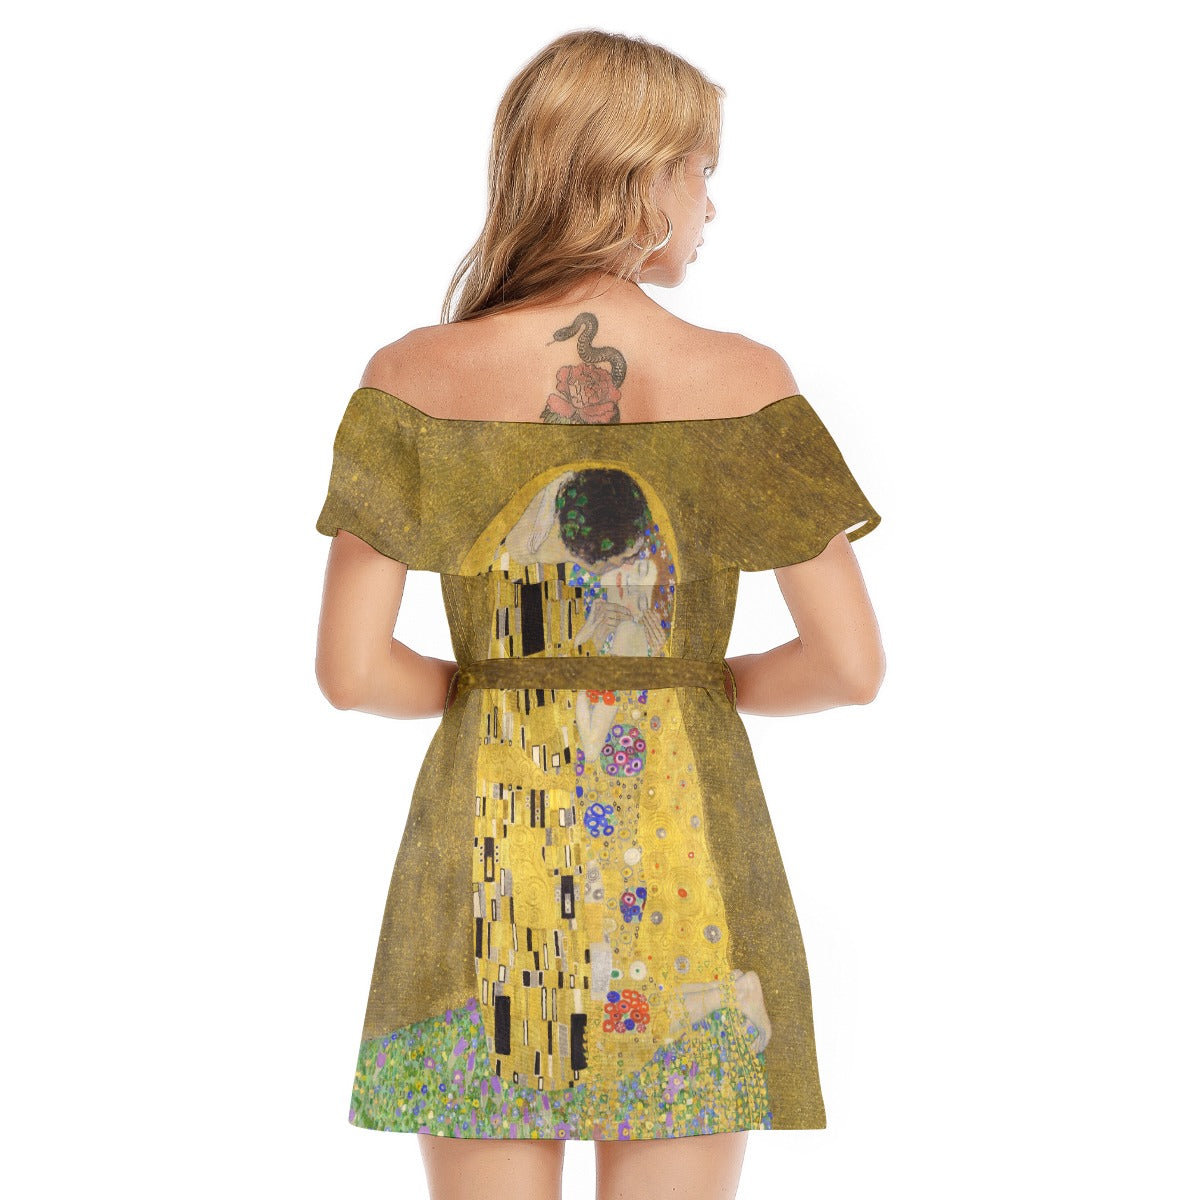 Whimsical fashion attire inspired by the iconic painting